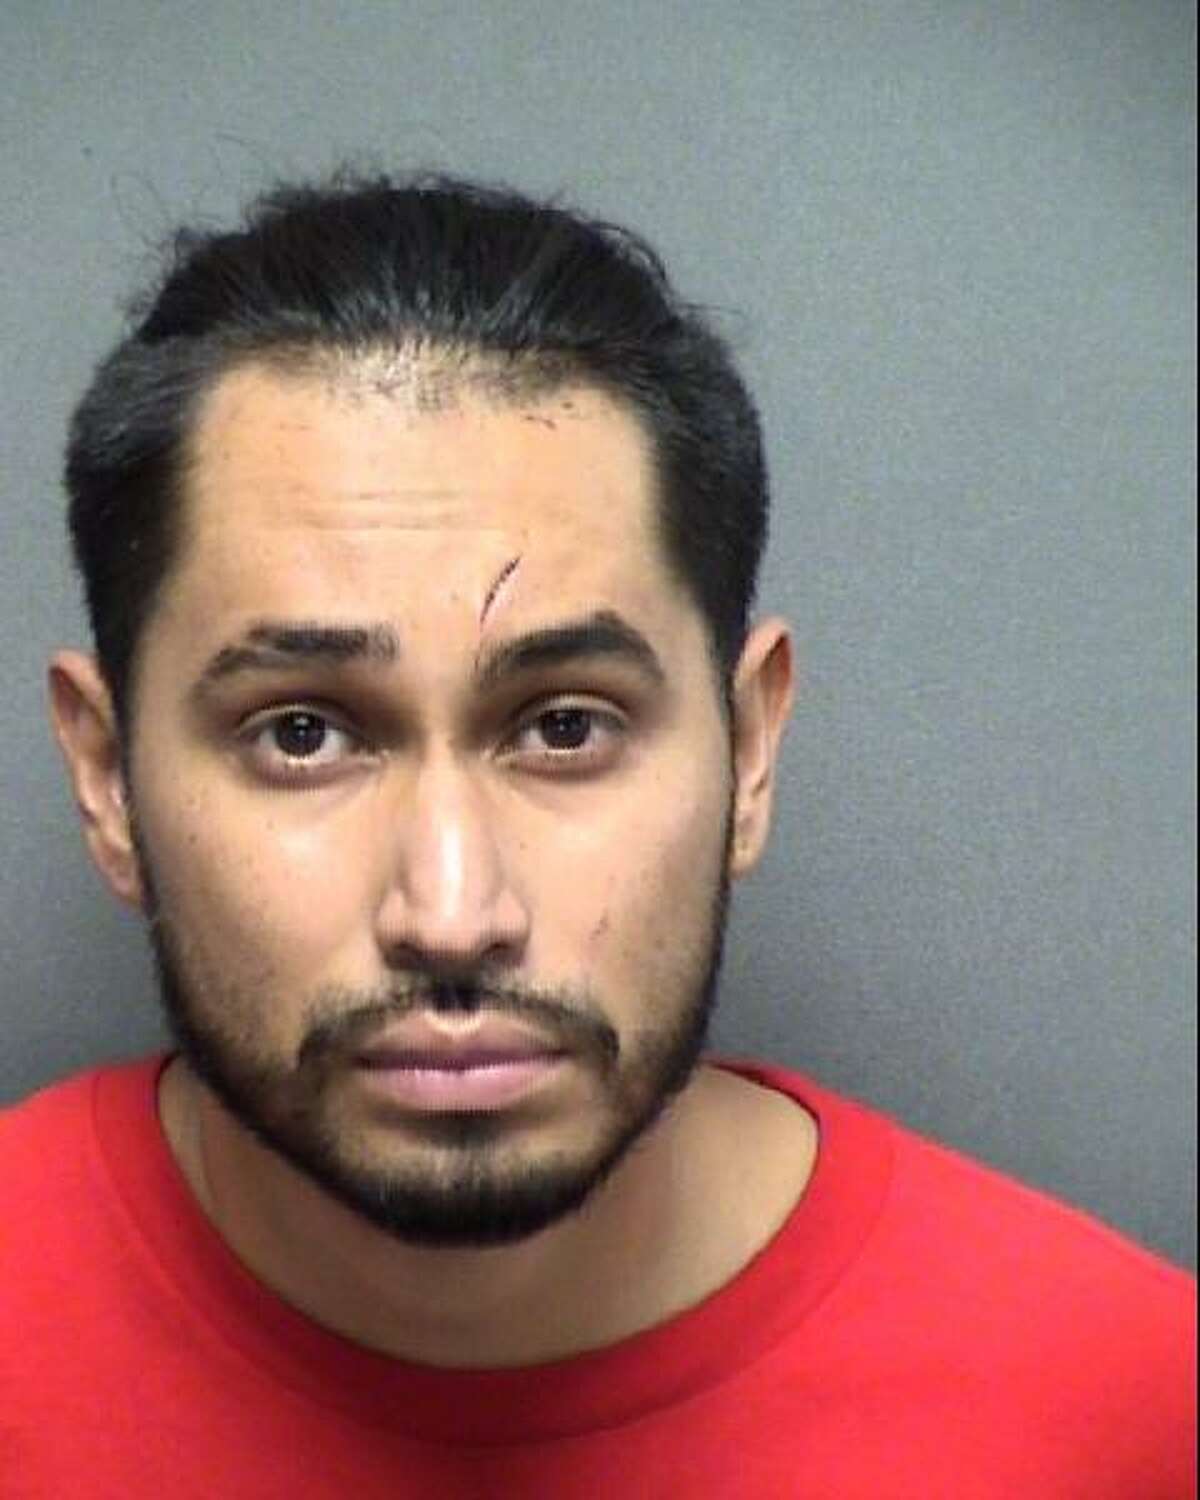 Francisco Javier Garcia Ventura, 29, has been charged with murder in the death of his girlfriend Crystal Garcia.